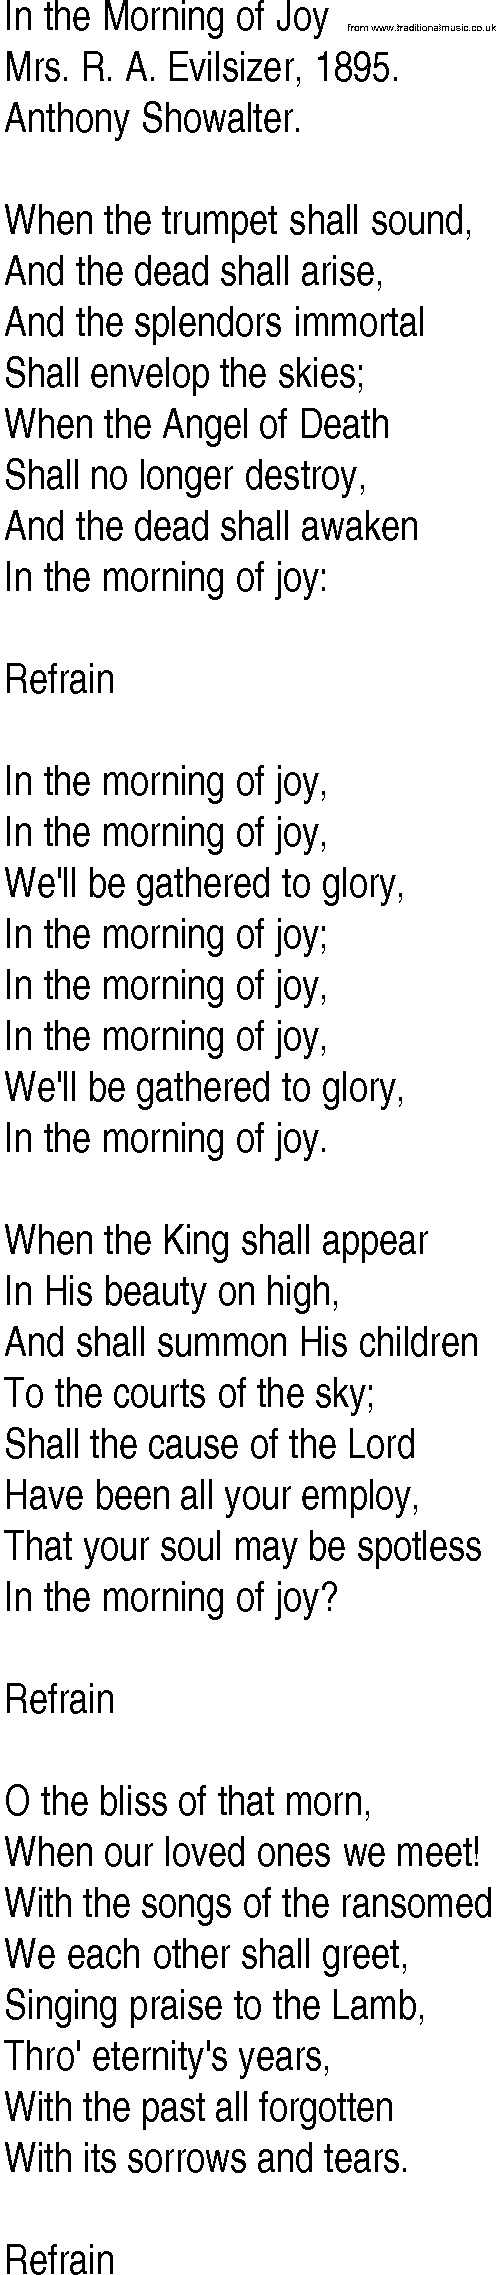 Hymn and Gospel Song: In the Morning of Joy by Mrs R A Evilsizer lyrics